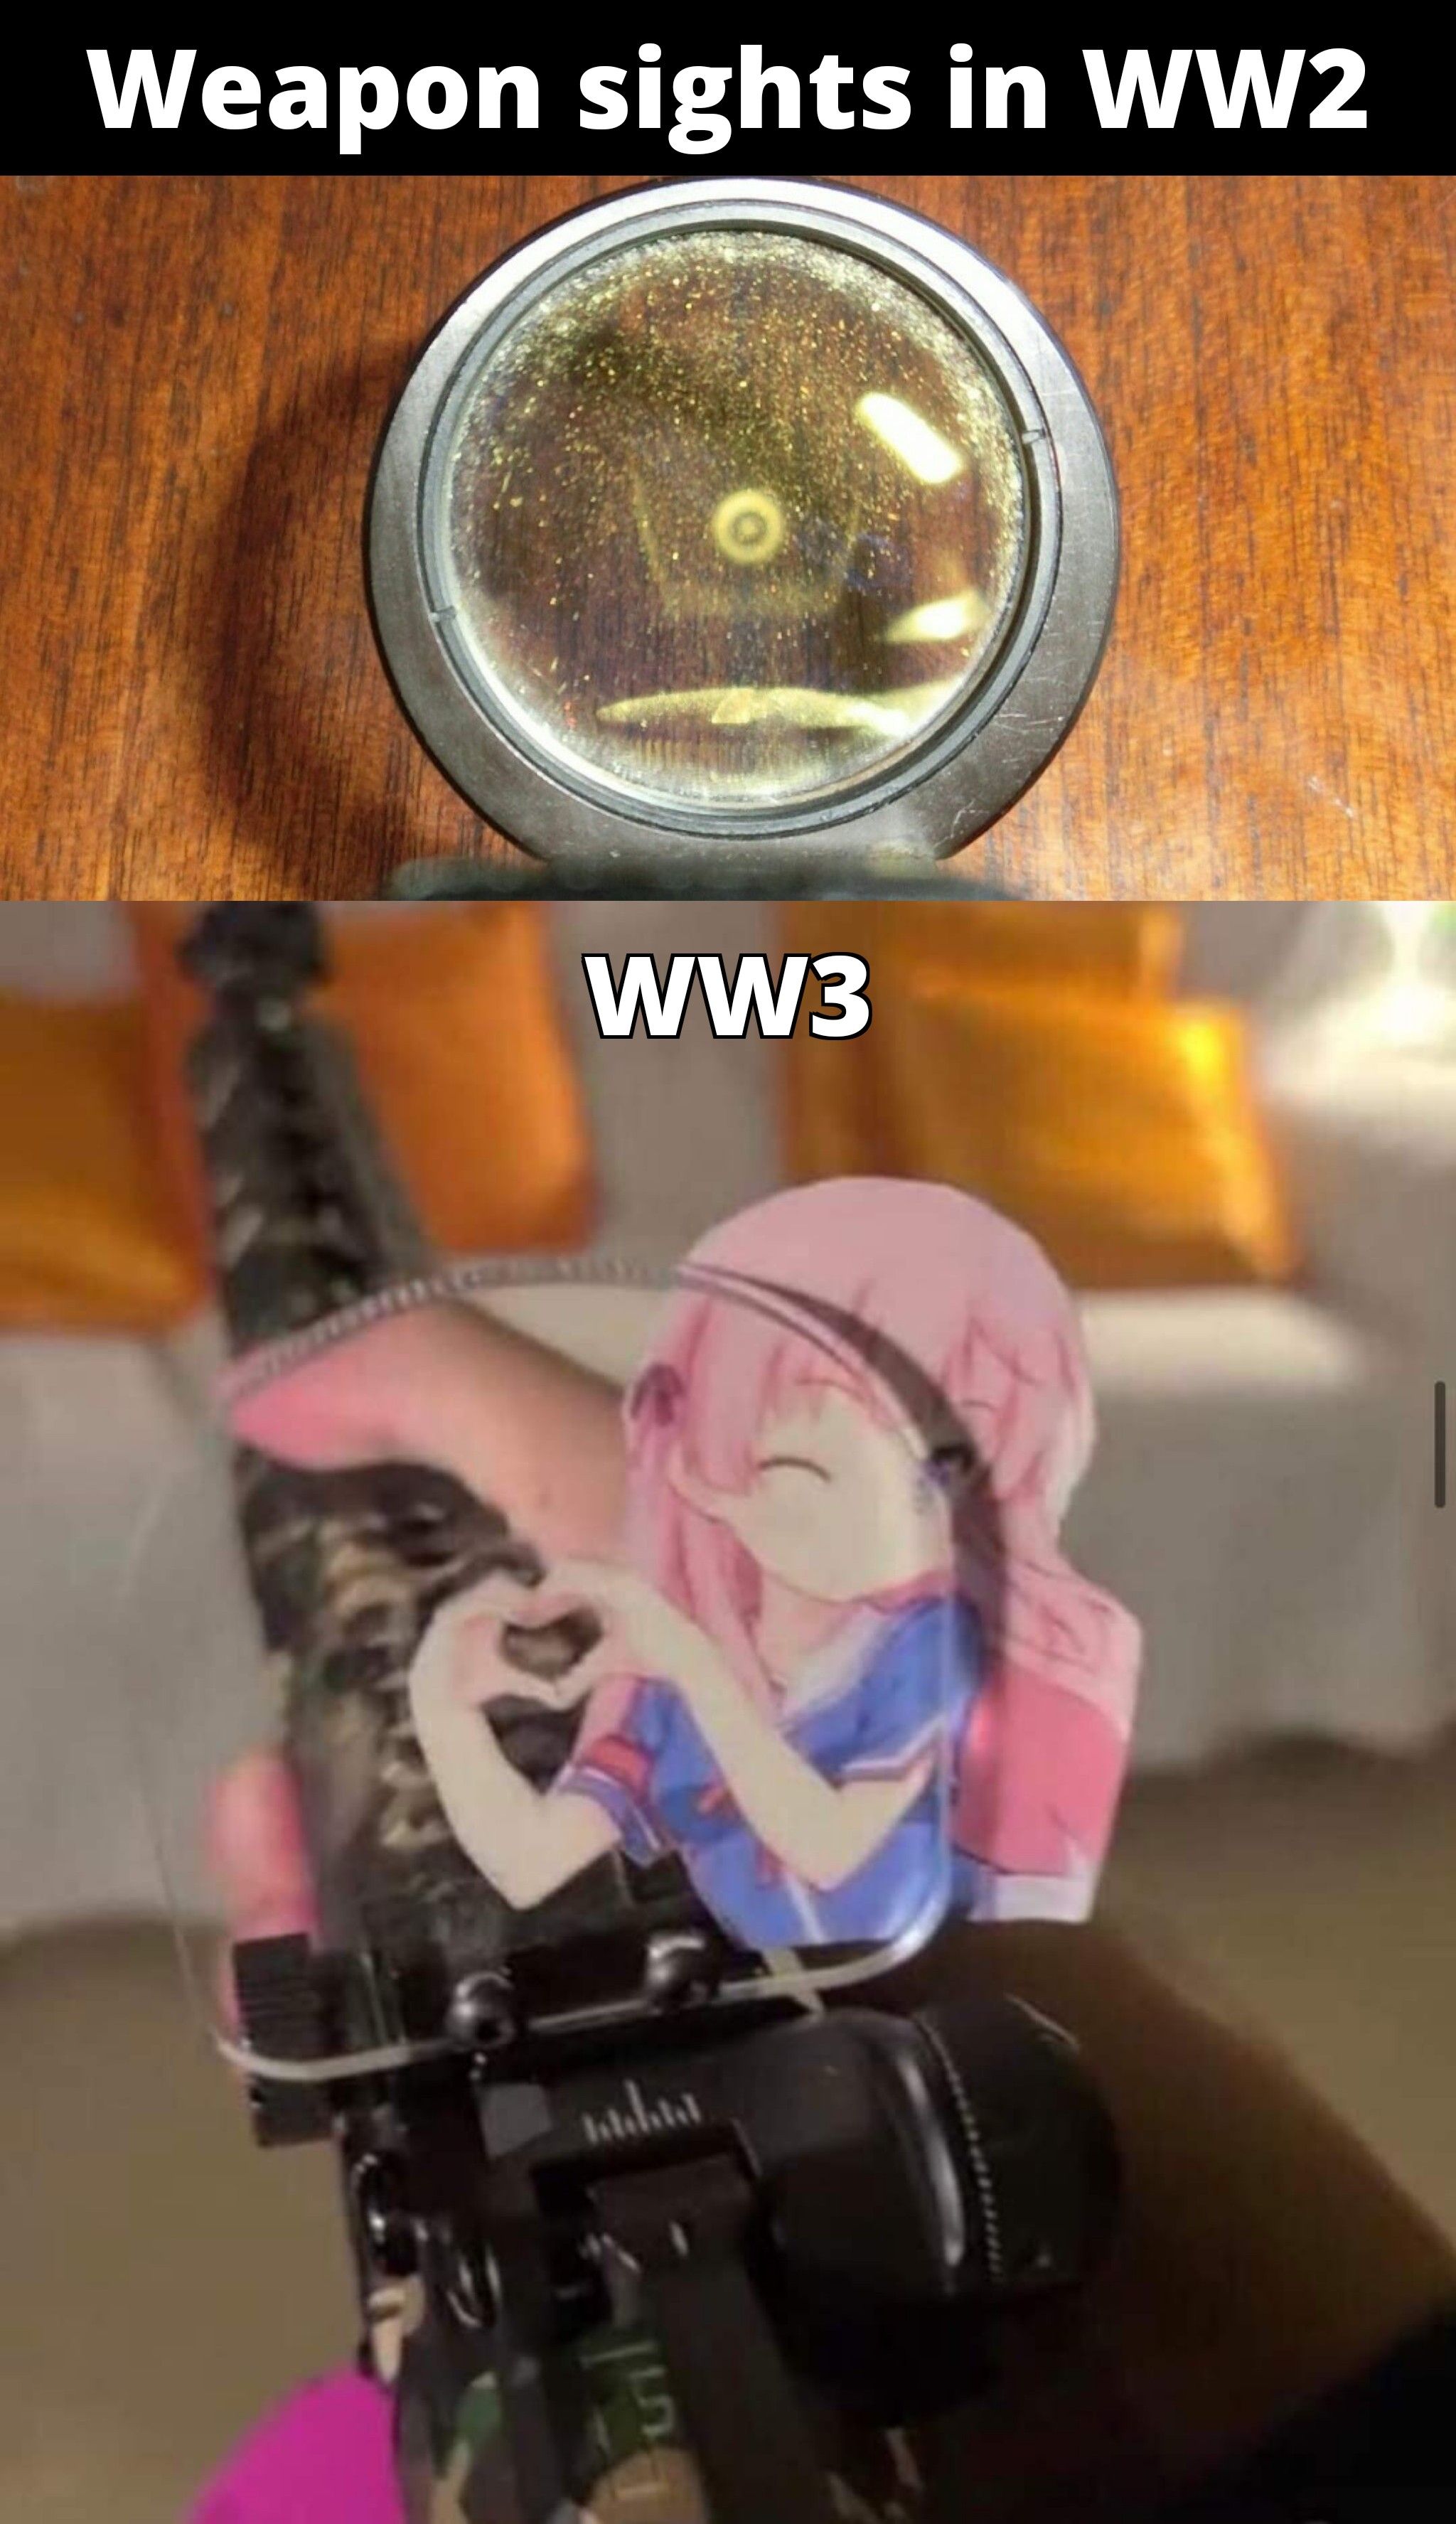 Damm you weebs